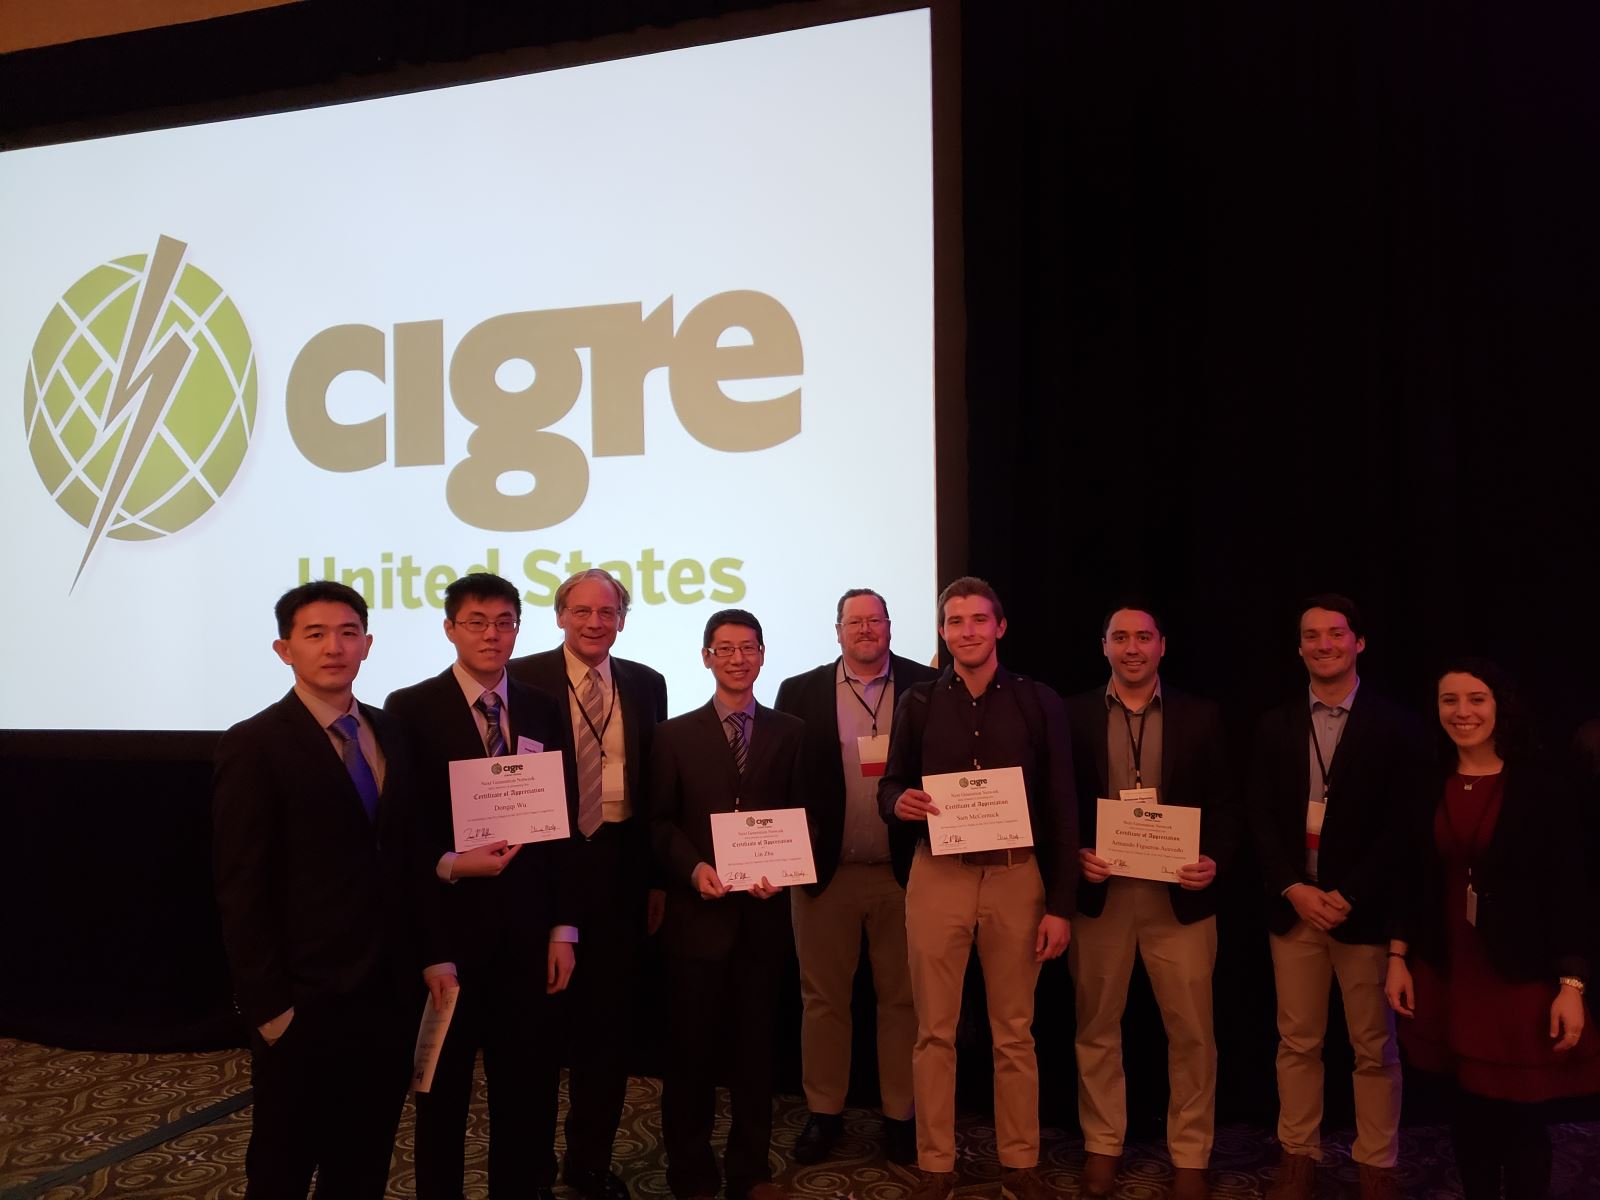 CIGRE United States Next Generation Network - 5th Annual Paper Competition Provides Younger Members a Platform